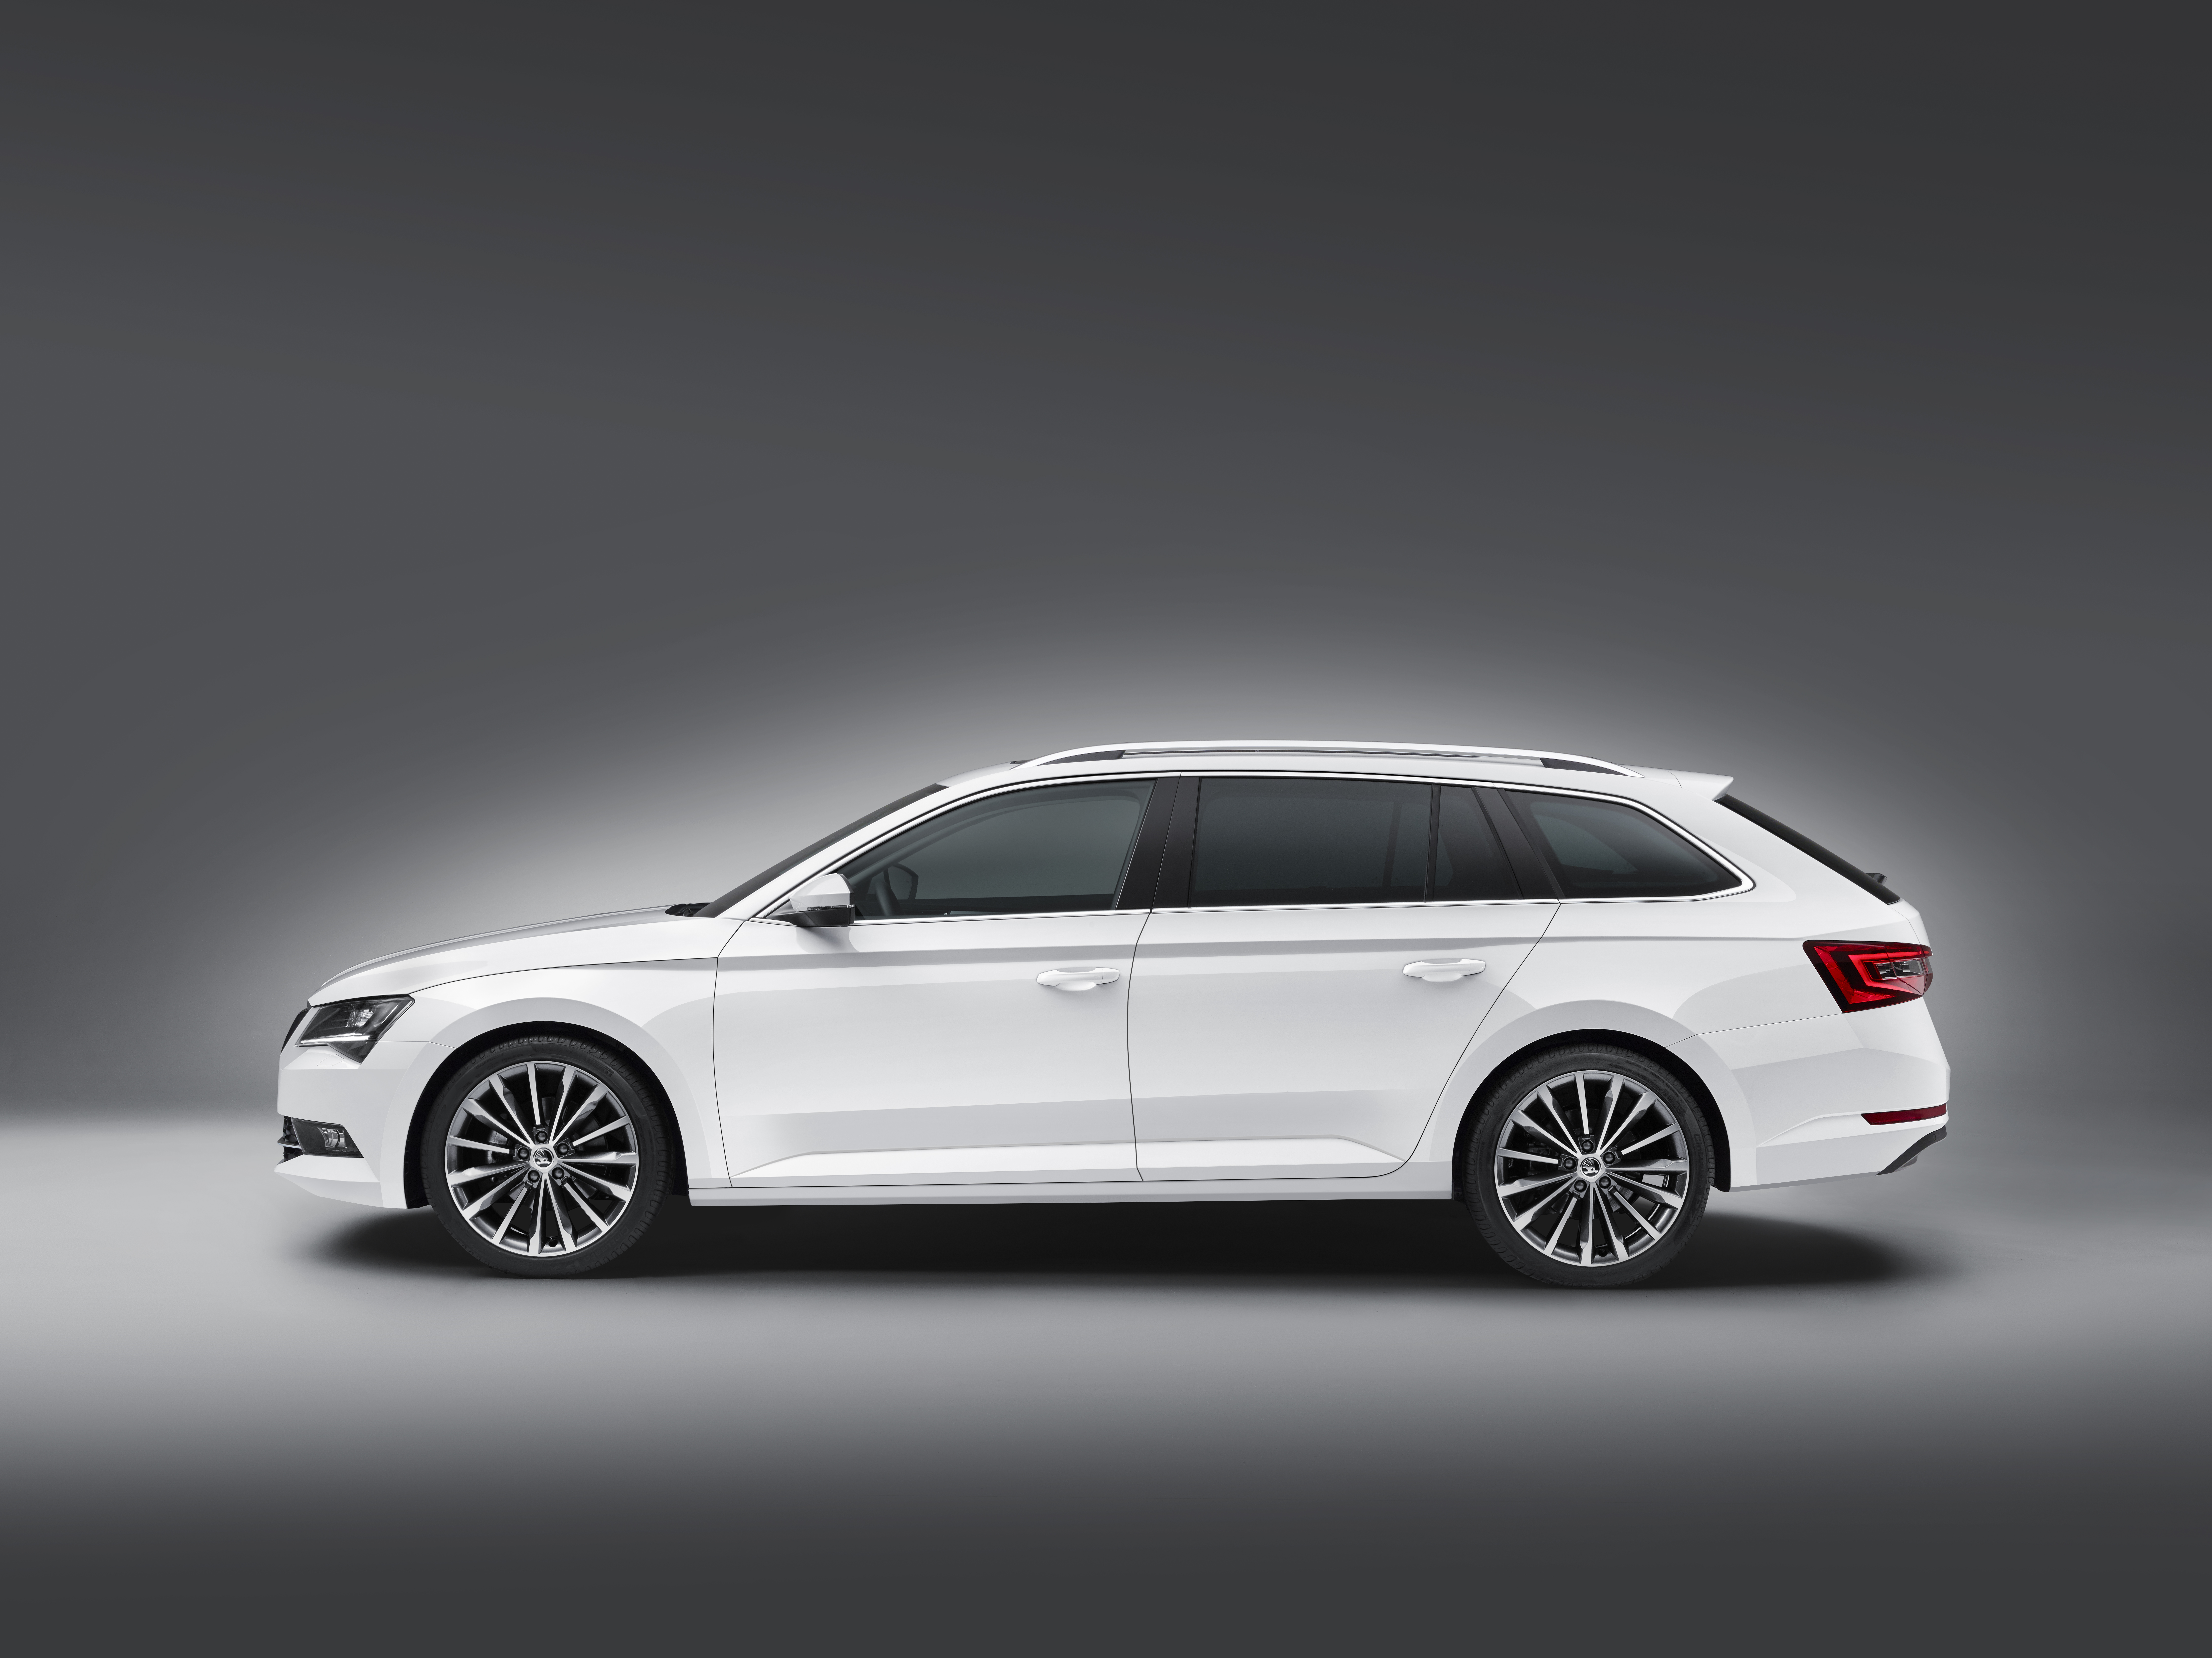 The new SKODA Superb Combi: Spacious giant with top-of-the-range